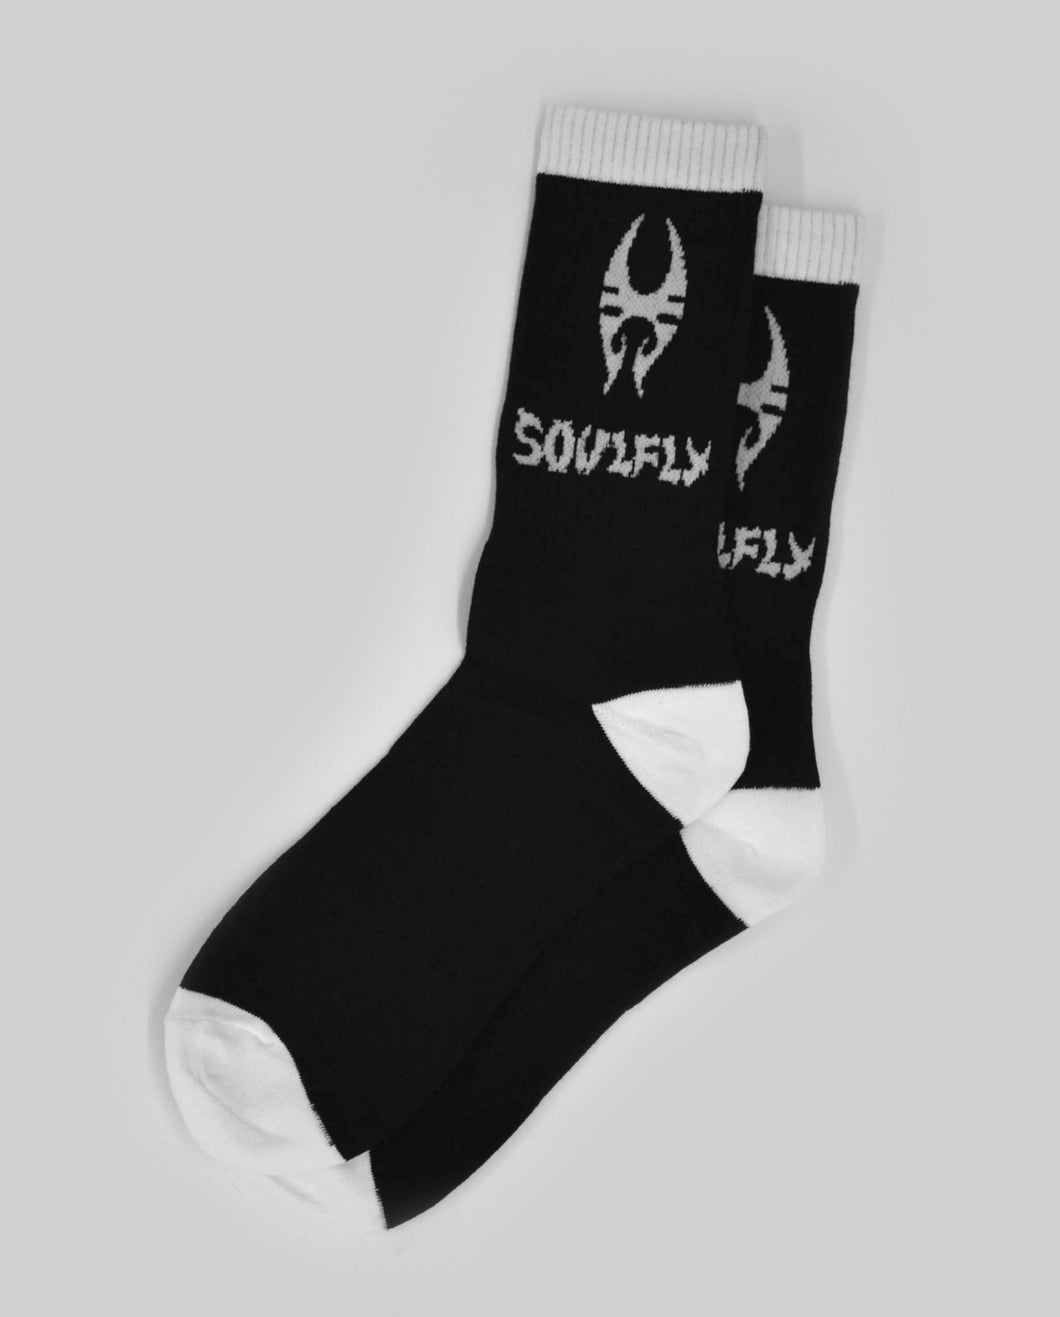 Soulfly Black and White Socks